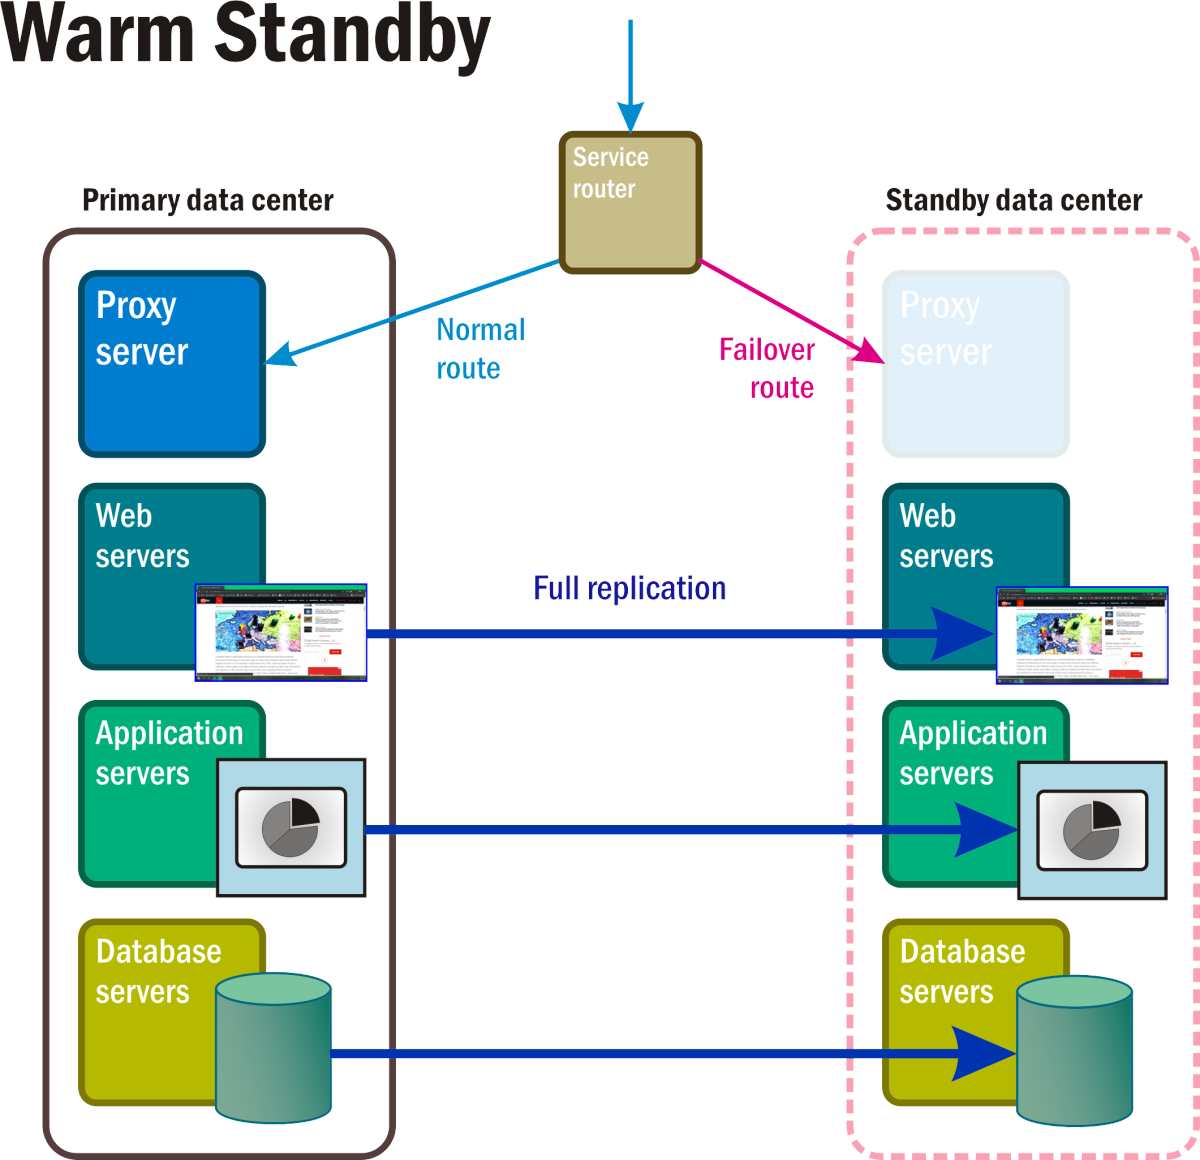 Figure 6: A Warm standby recovery scenario with some components in the standby namespace fully operational.